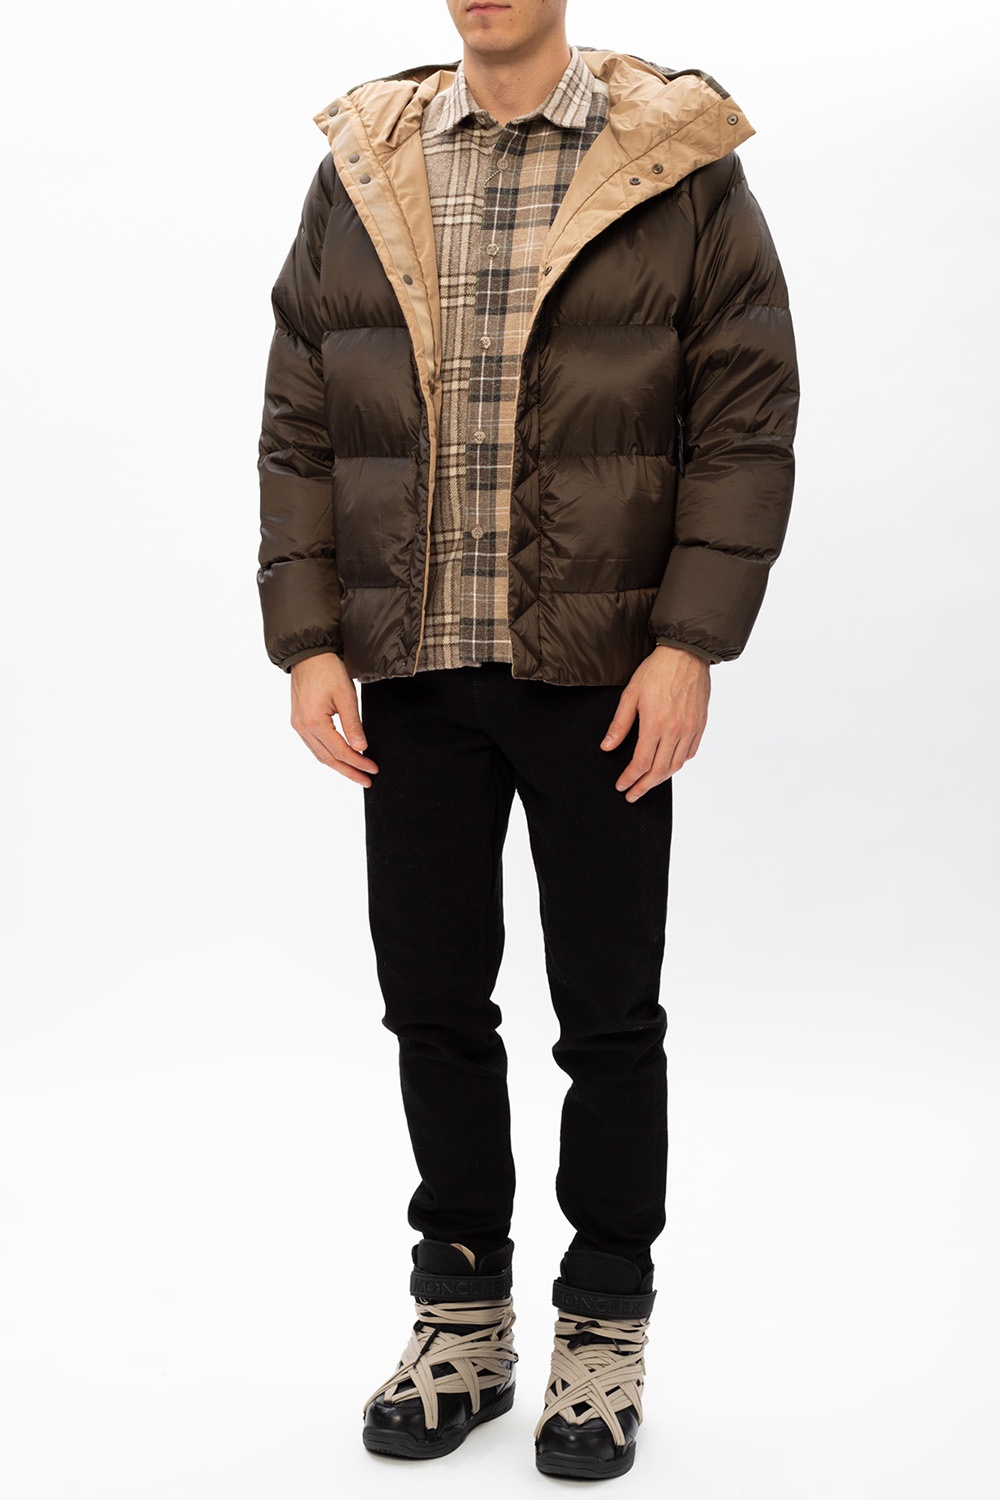 White Mountaineering Hooded down Grey jacket